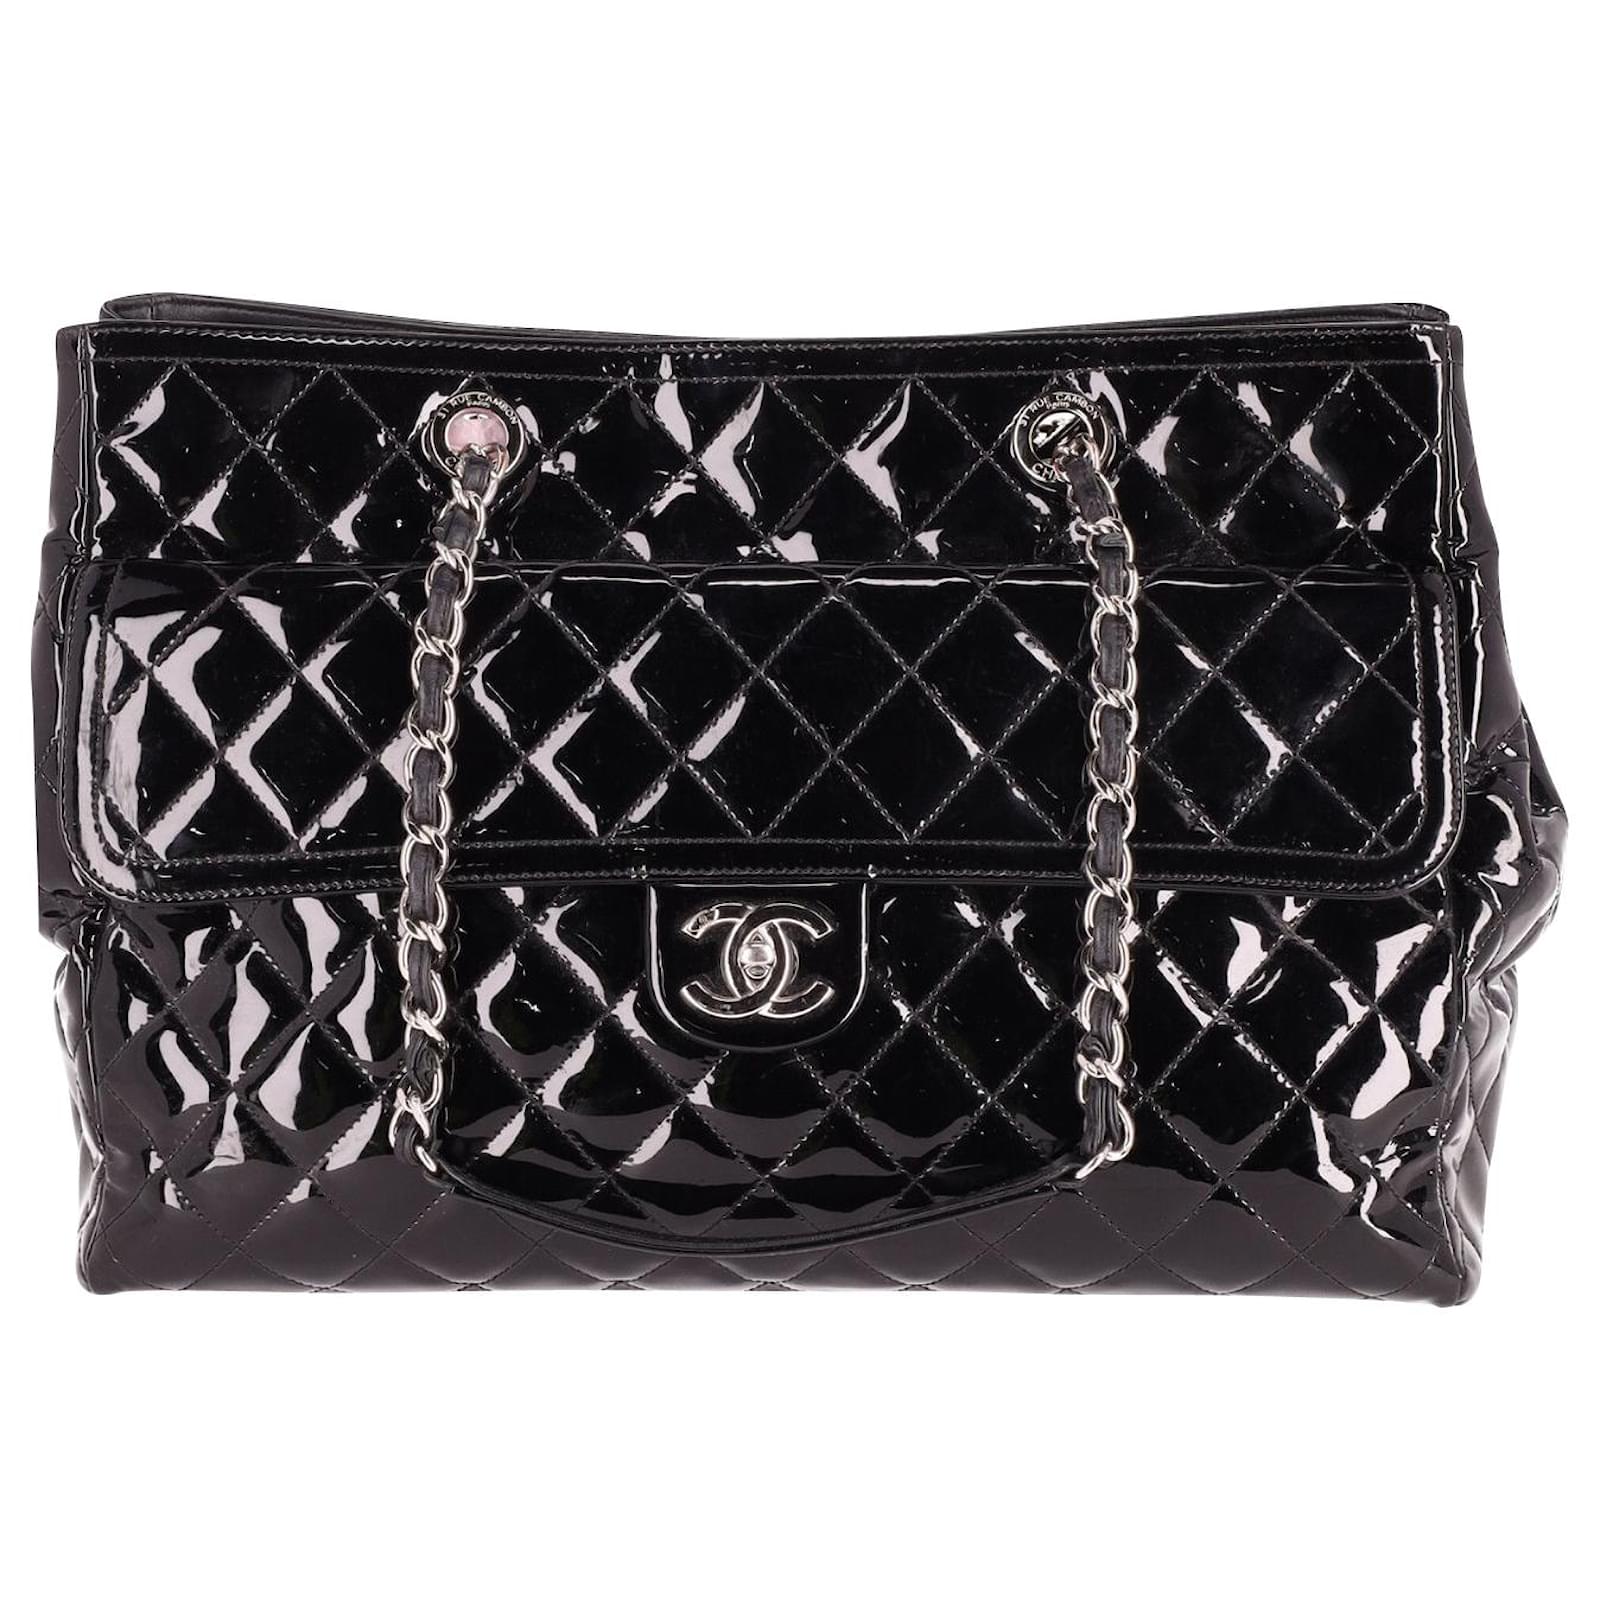 CHANEL Pre-Owned 1995 CC turn-lock diamond-quilted Tote Bag - Farfetch